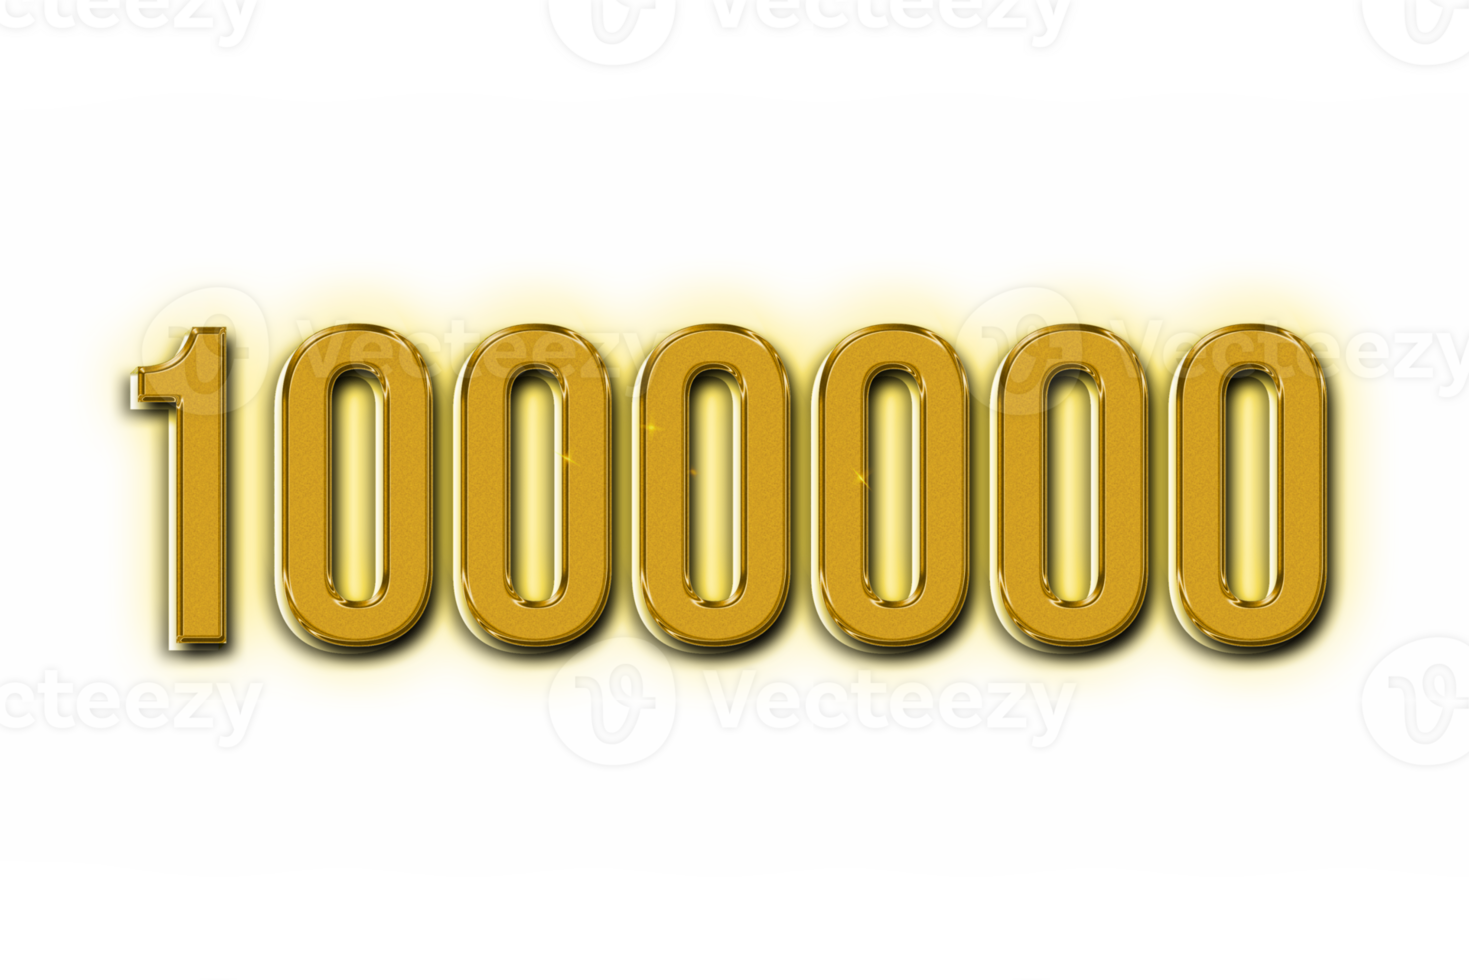 1000000 subscribers celebration greeting Number with golden design png